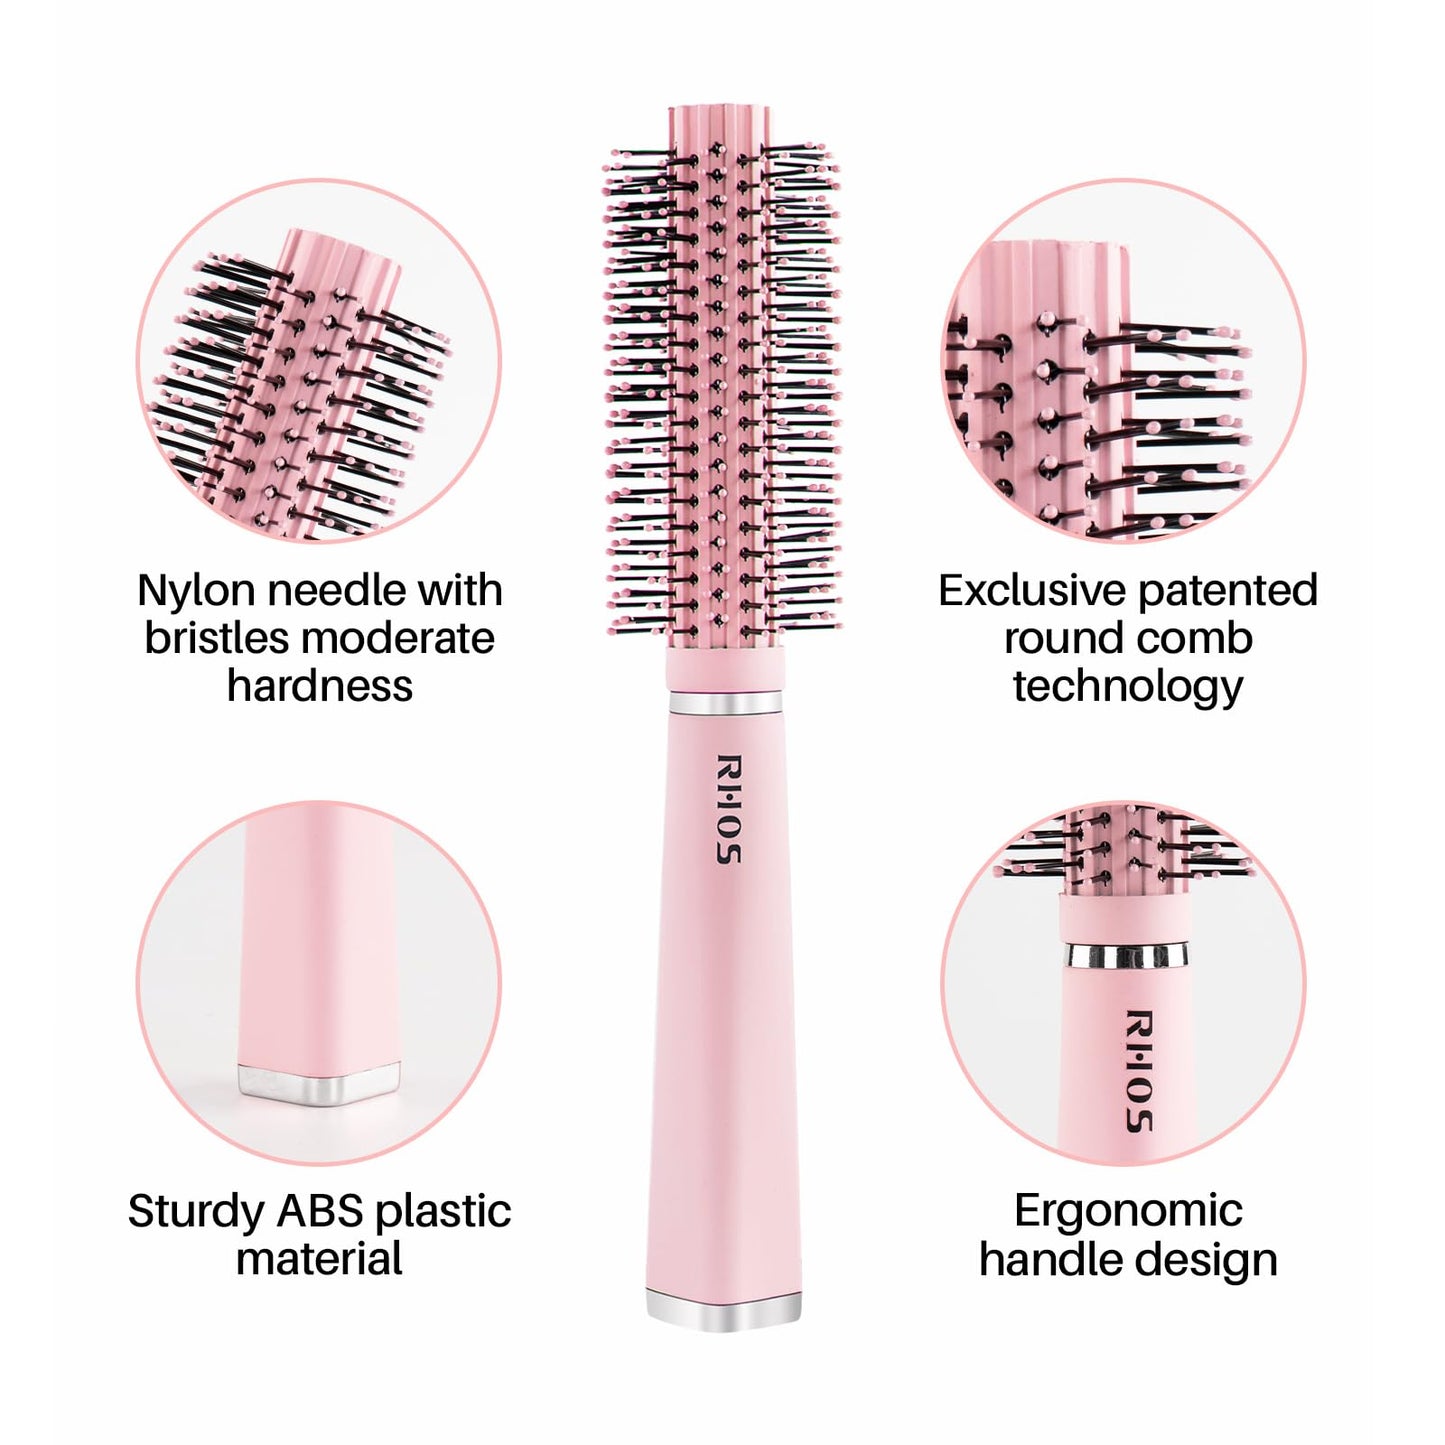 RHOS Round Brush for Blow out/Styling/Curling-Small Round Hair Brush for Bangs/Thin/Short/Curly Hair-1.5 Inch Small Roller Brush for Women&Men(Pink)